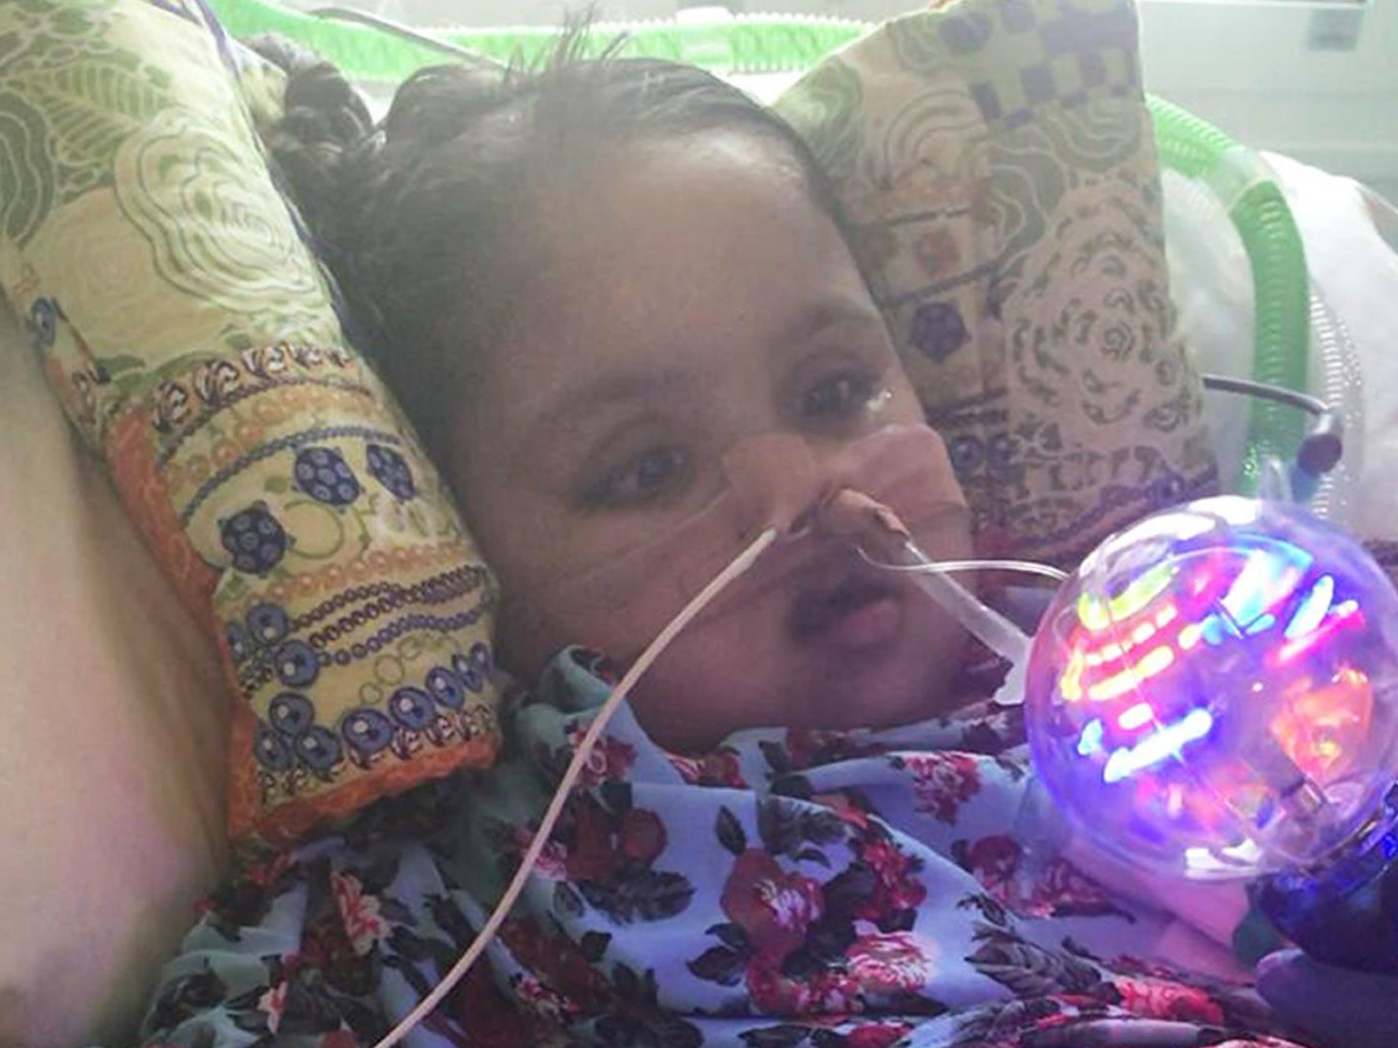 Five-year-old Tafida is on life support at the Royal London Hospital